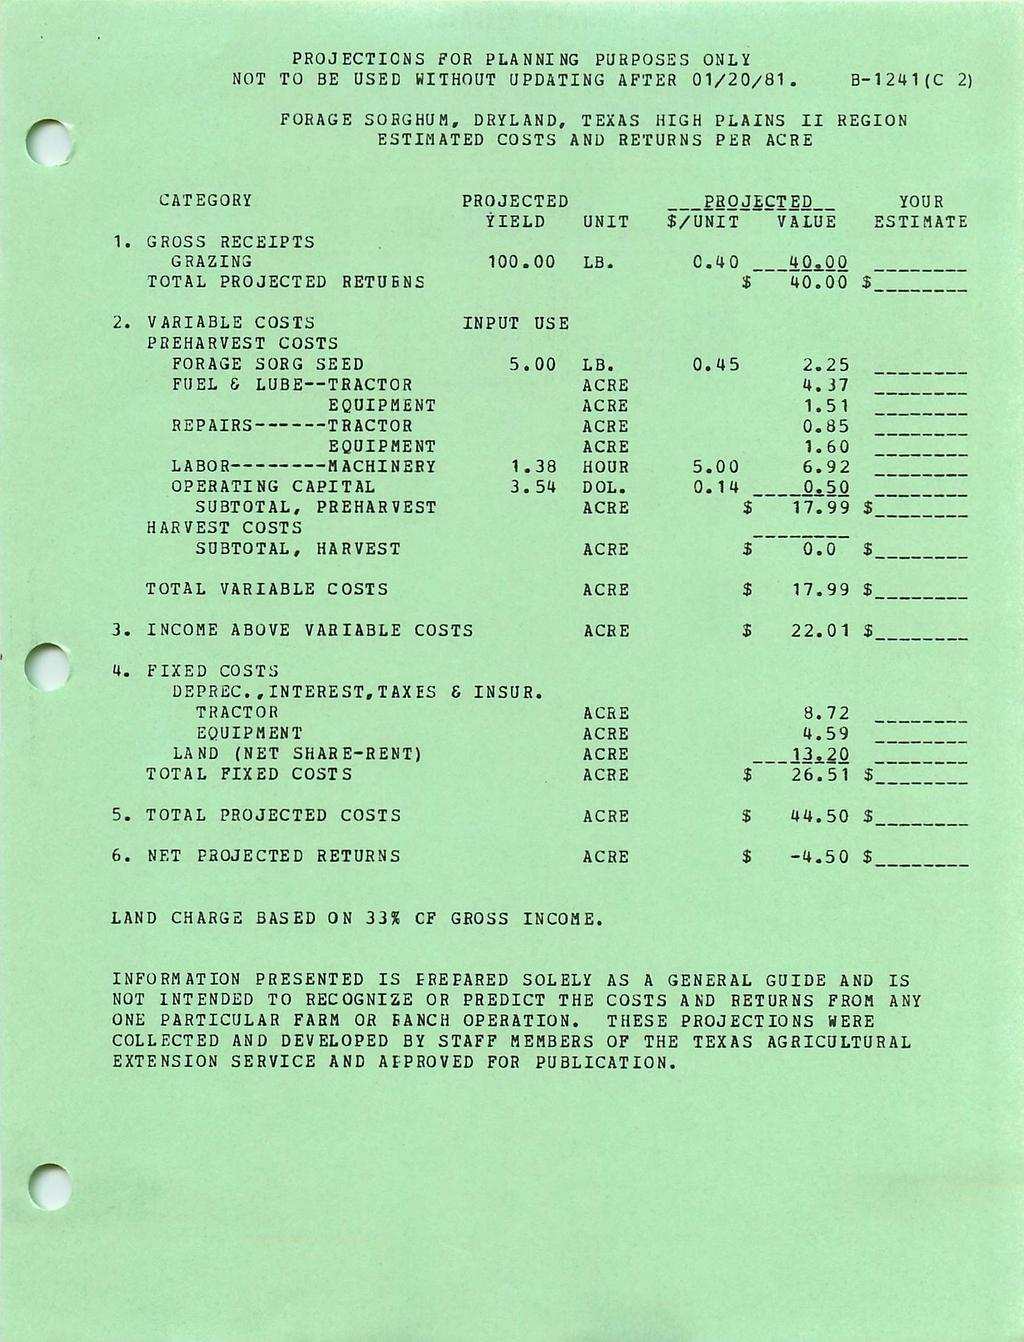 PROJECTIONS FOR PLANNING PURPOSES ONLY NOT TO BE USED WITHOUT UPDATING AFTER 01/20/81 B1241 (C 2) FORAGE SORGHUM, DRYLAND, TEXAS HIGH PLAINS II REGION ESTIMATED COSTS AND RETURNS PER CATEGORY